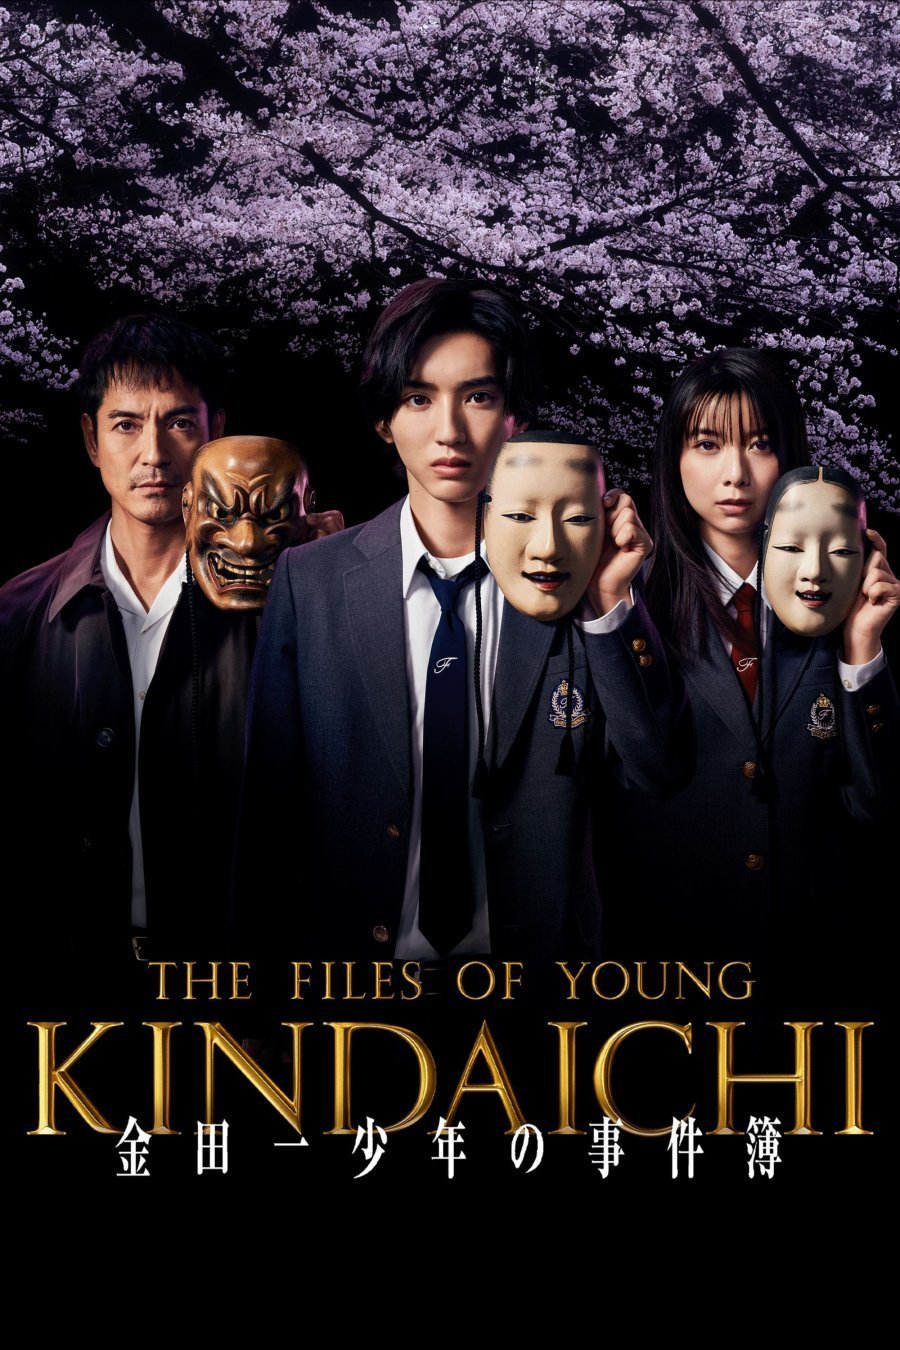 Japanese poster of the movie The Files of Young Kindaichi